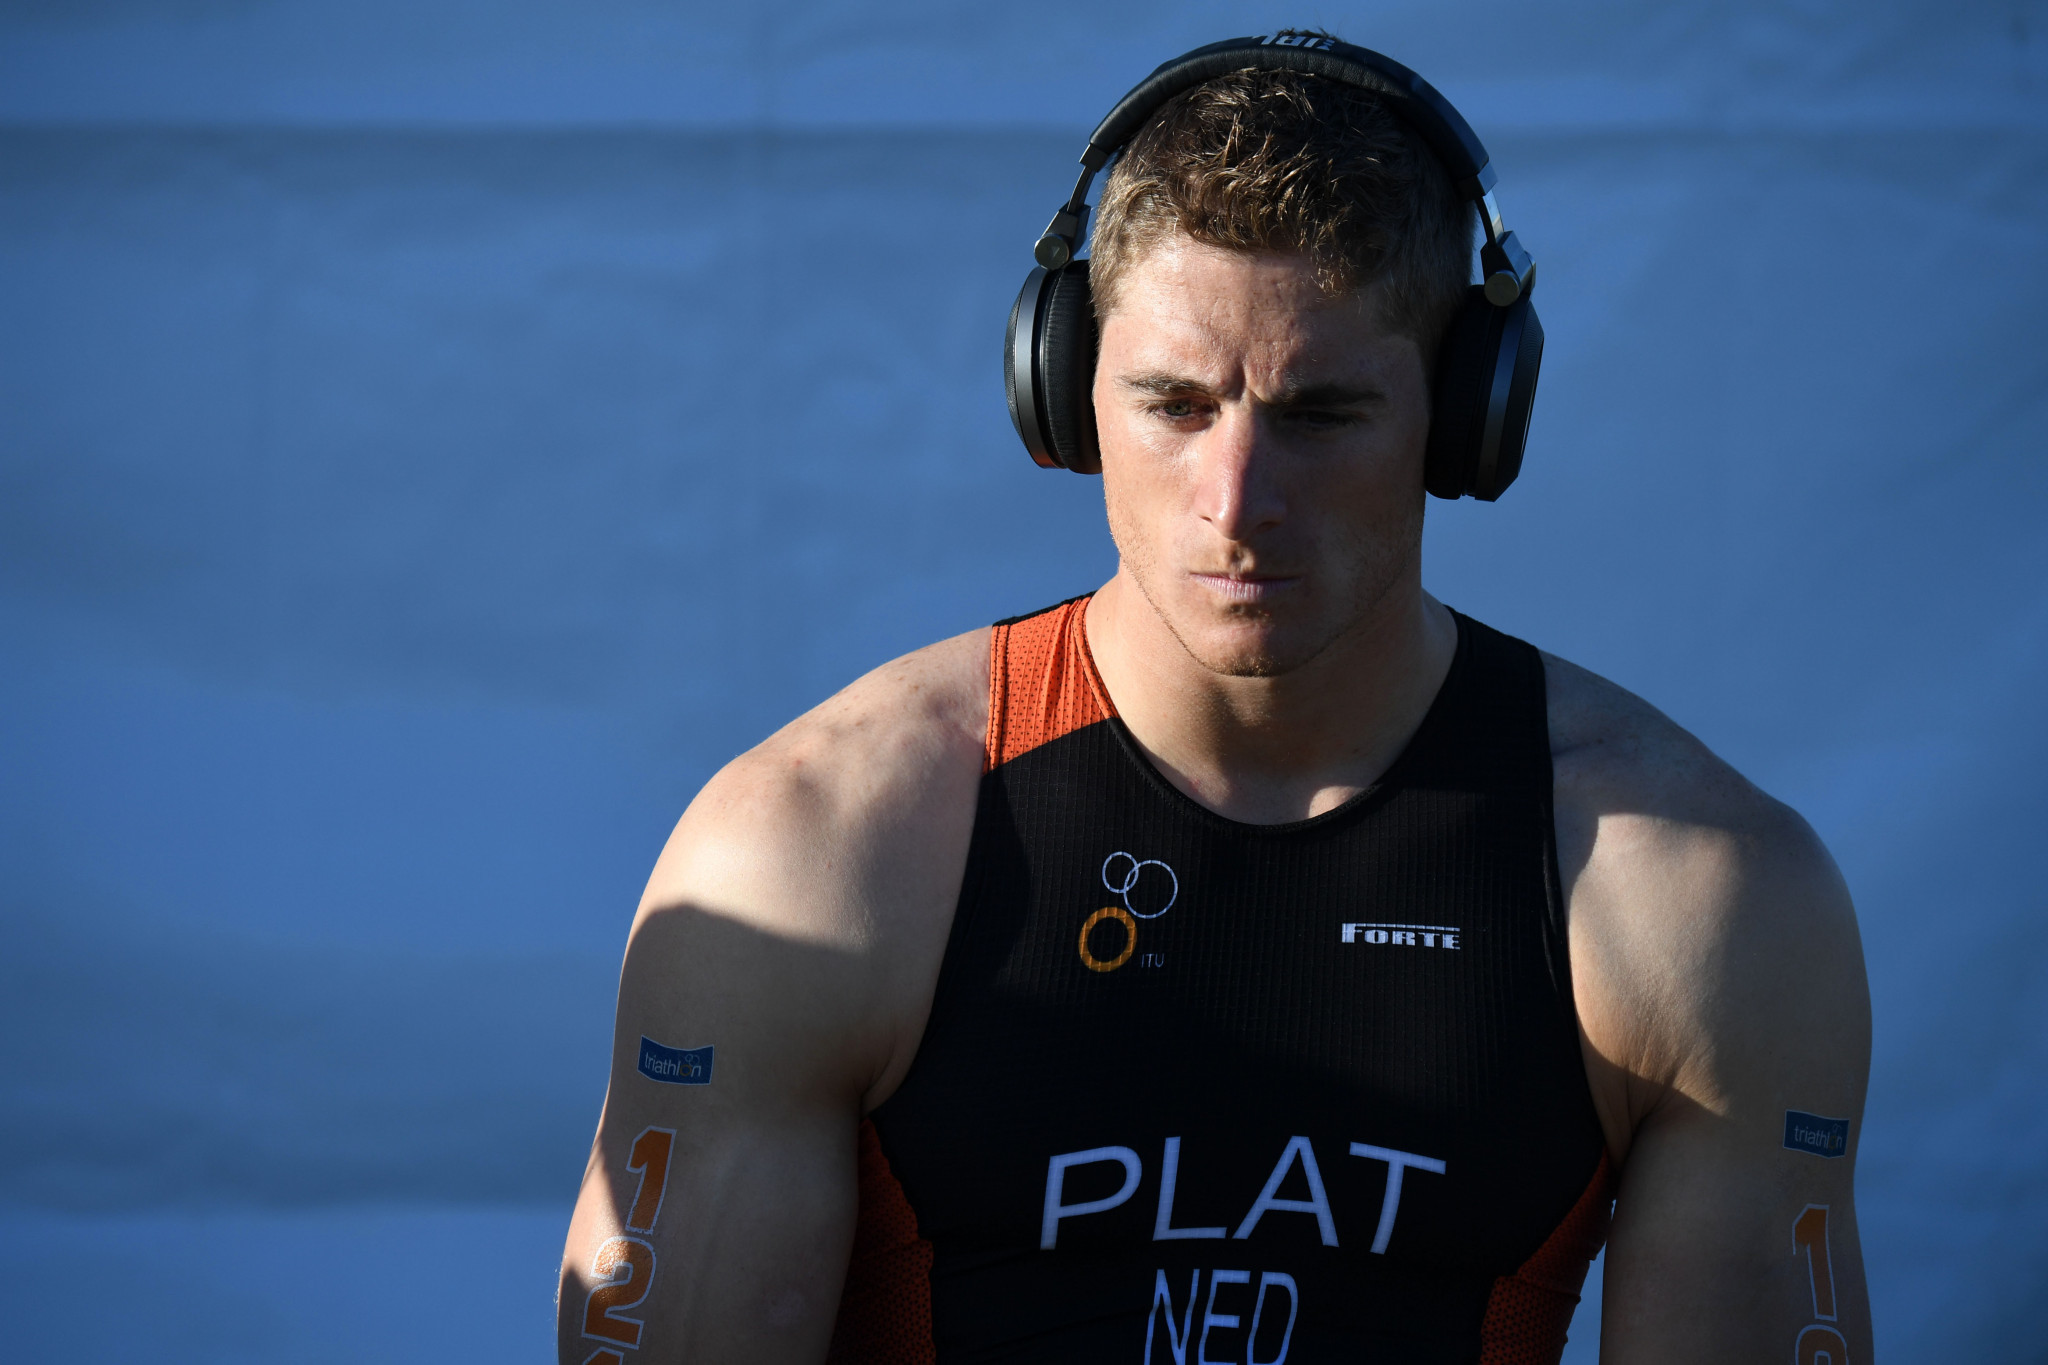 The Netherlands' Jetze Plat continued his winning streak to take the men's PTWC title in Abu Dhabi ©Getty Images